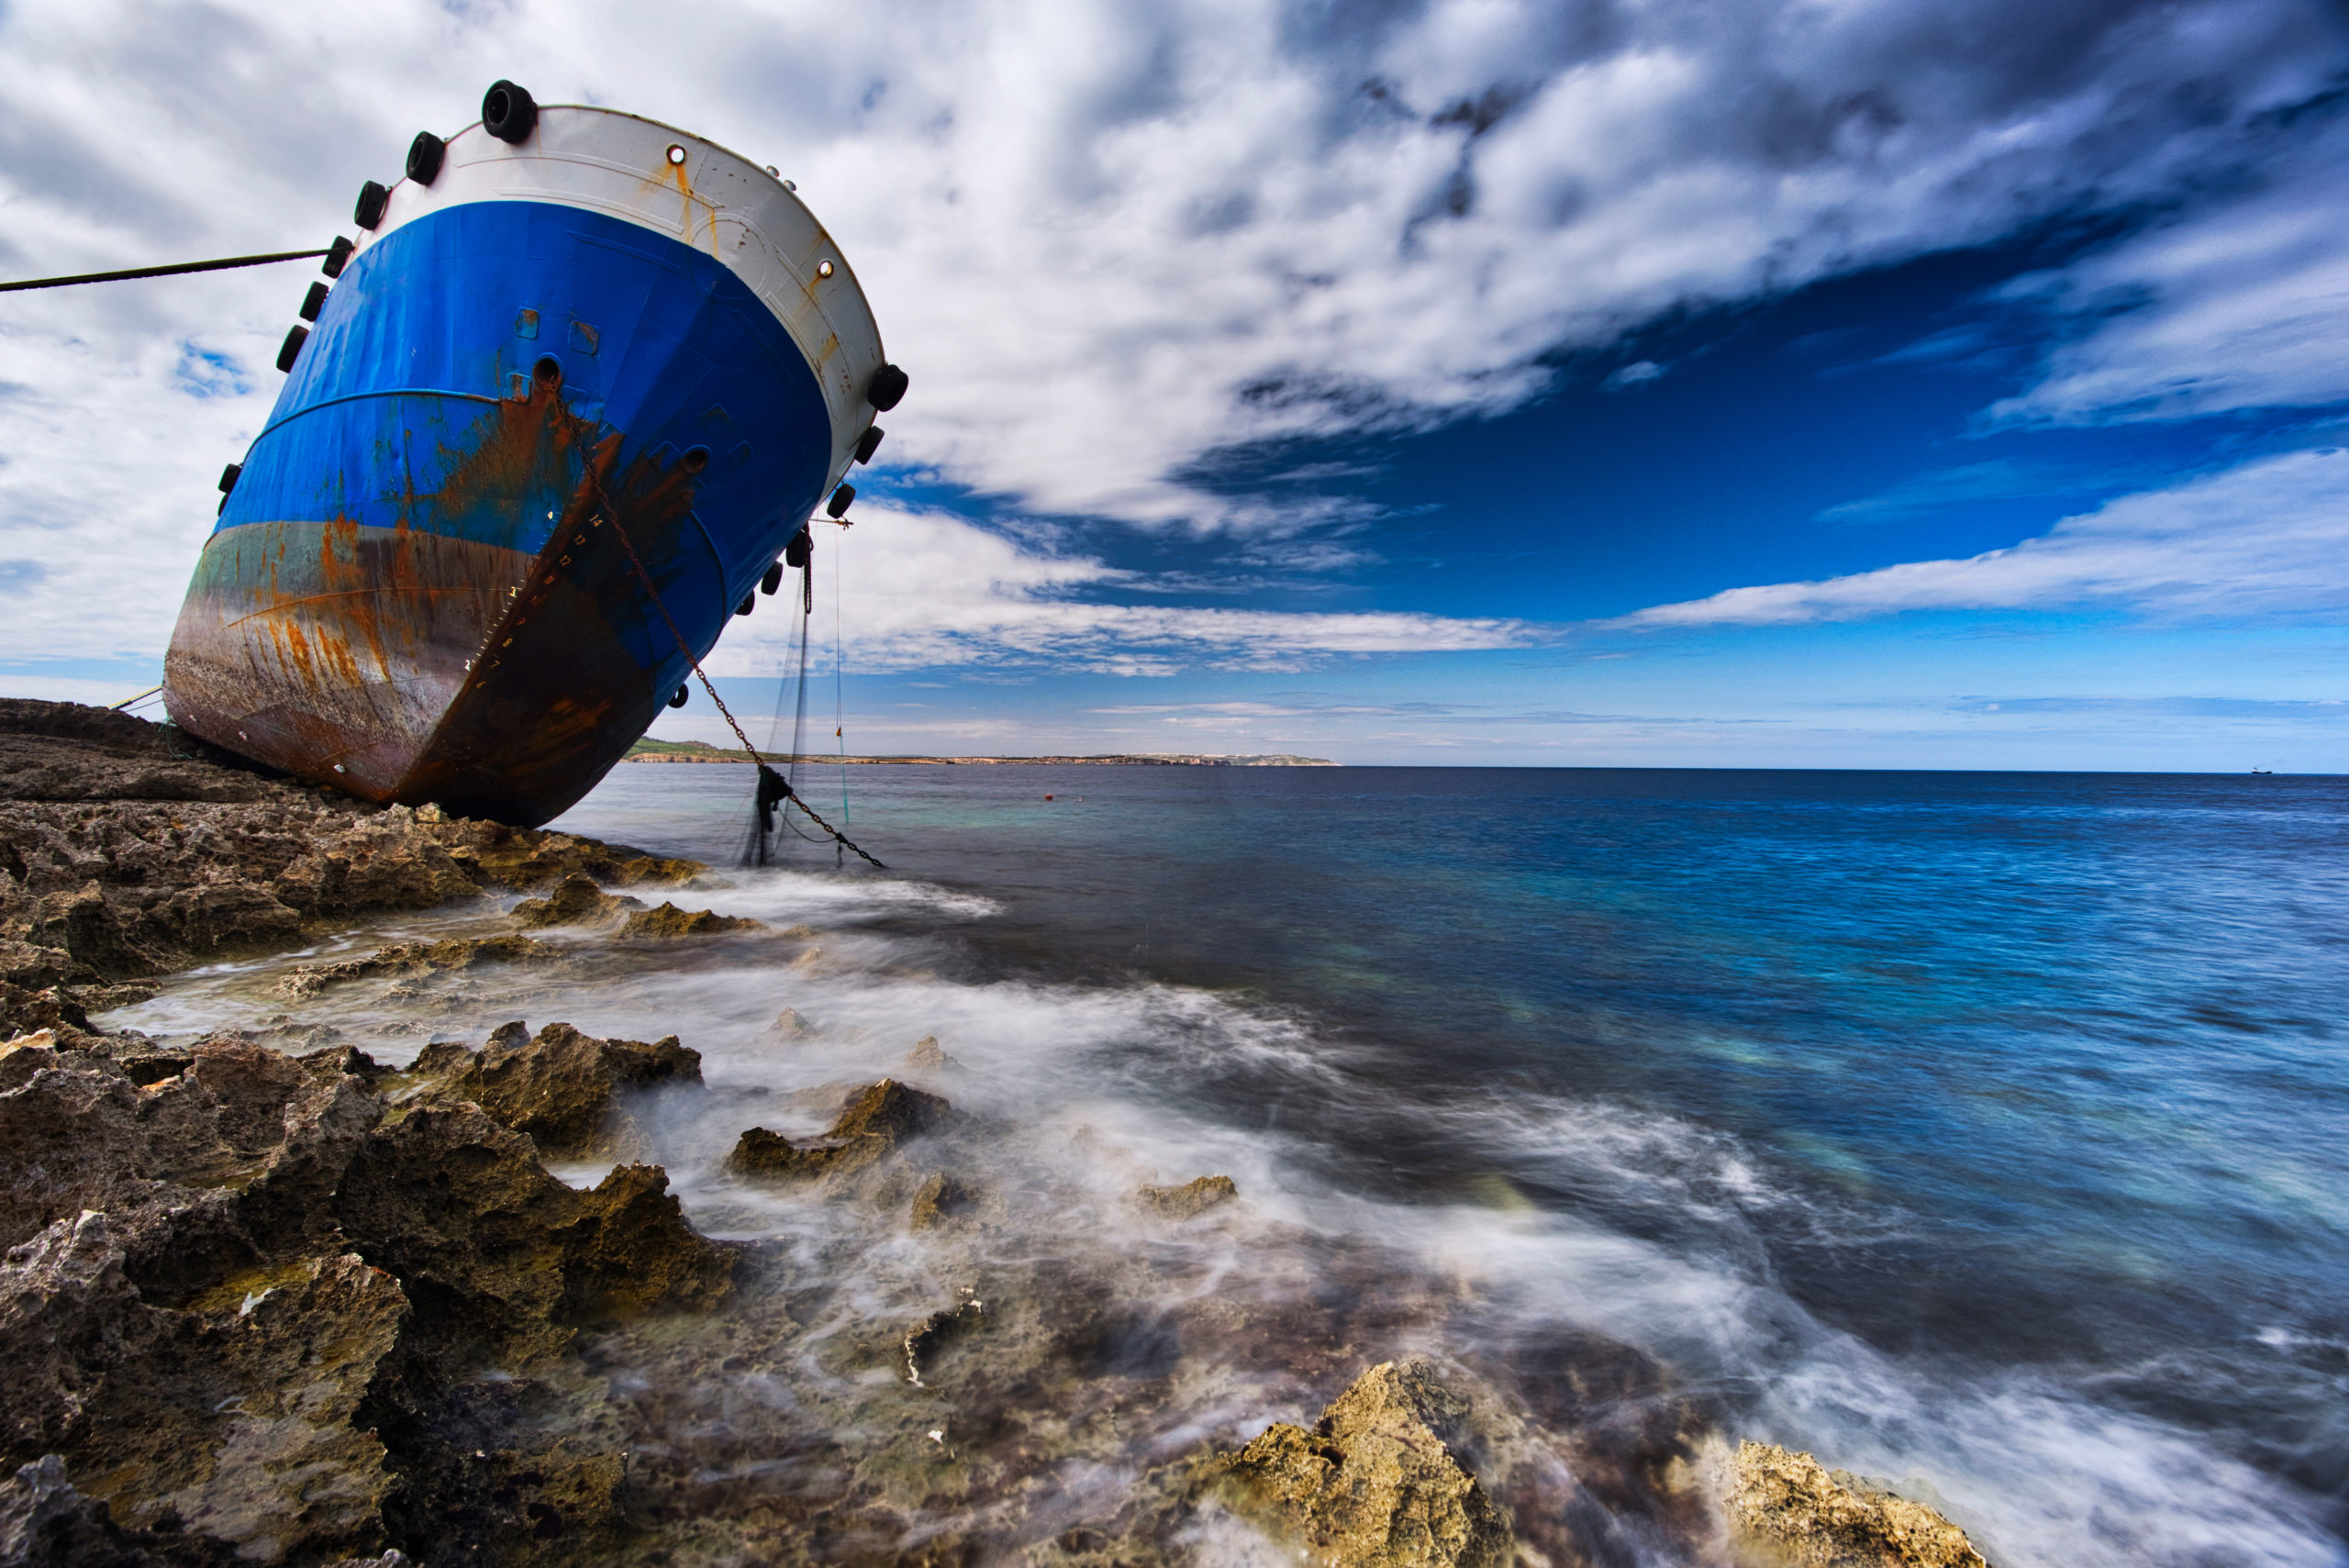 Sea view to stranded ship on the shore of Buggiba, Malta. Anchor placed on the shore. Shipwreck accident on rough stones shore.